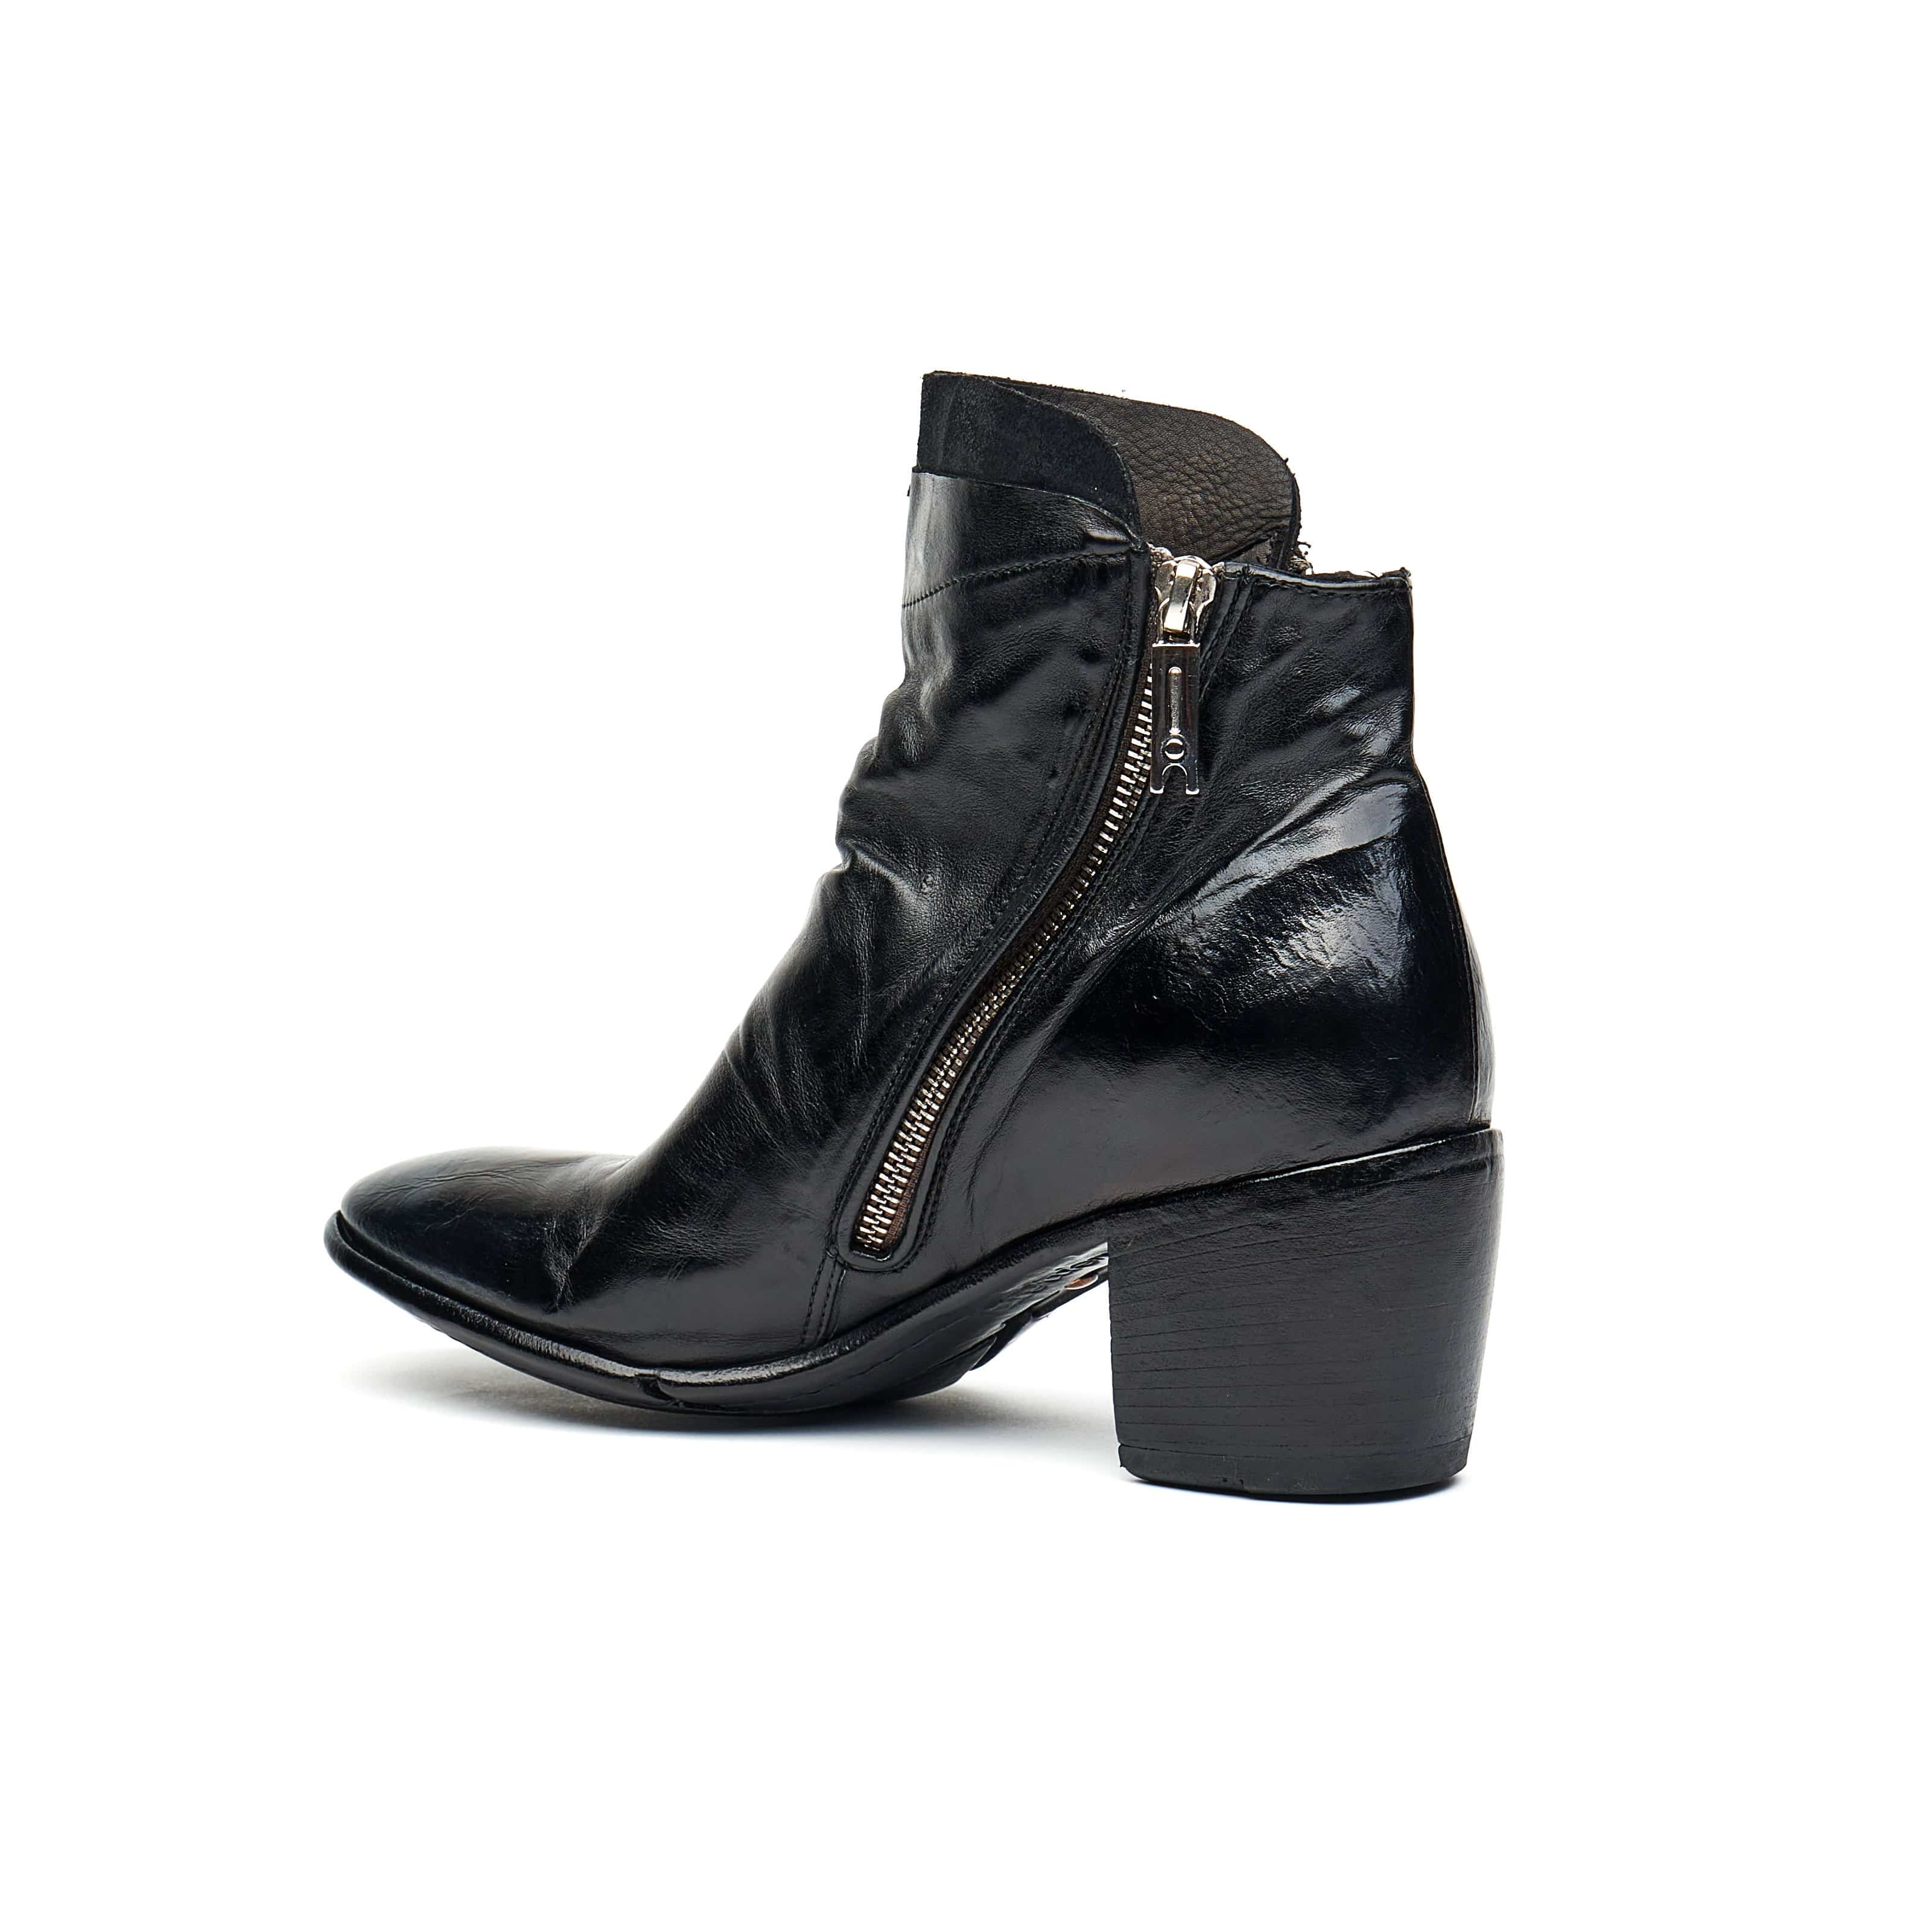 Women's Ankle Boots - Buy Exclusive Women's Ankle Boots Online – 124 Shoes